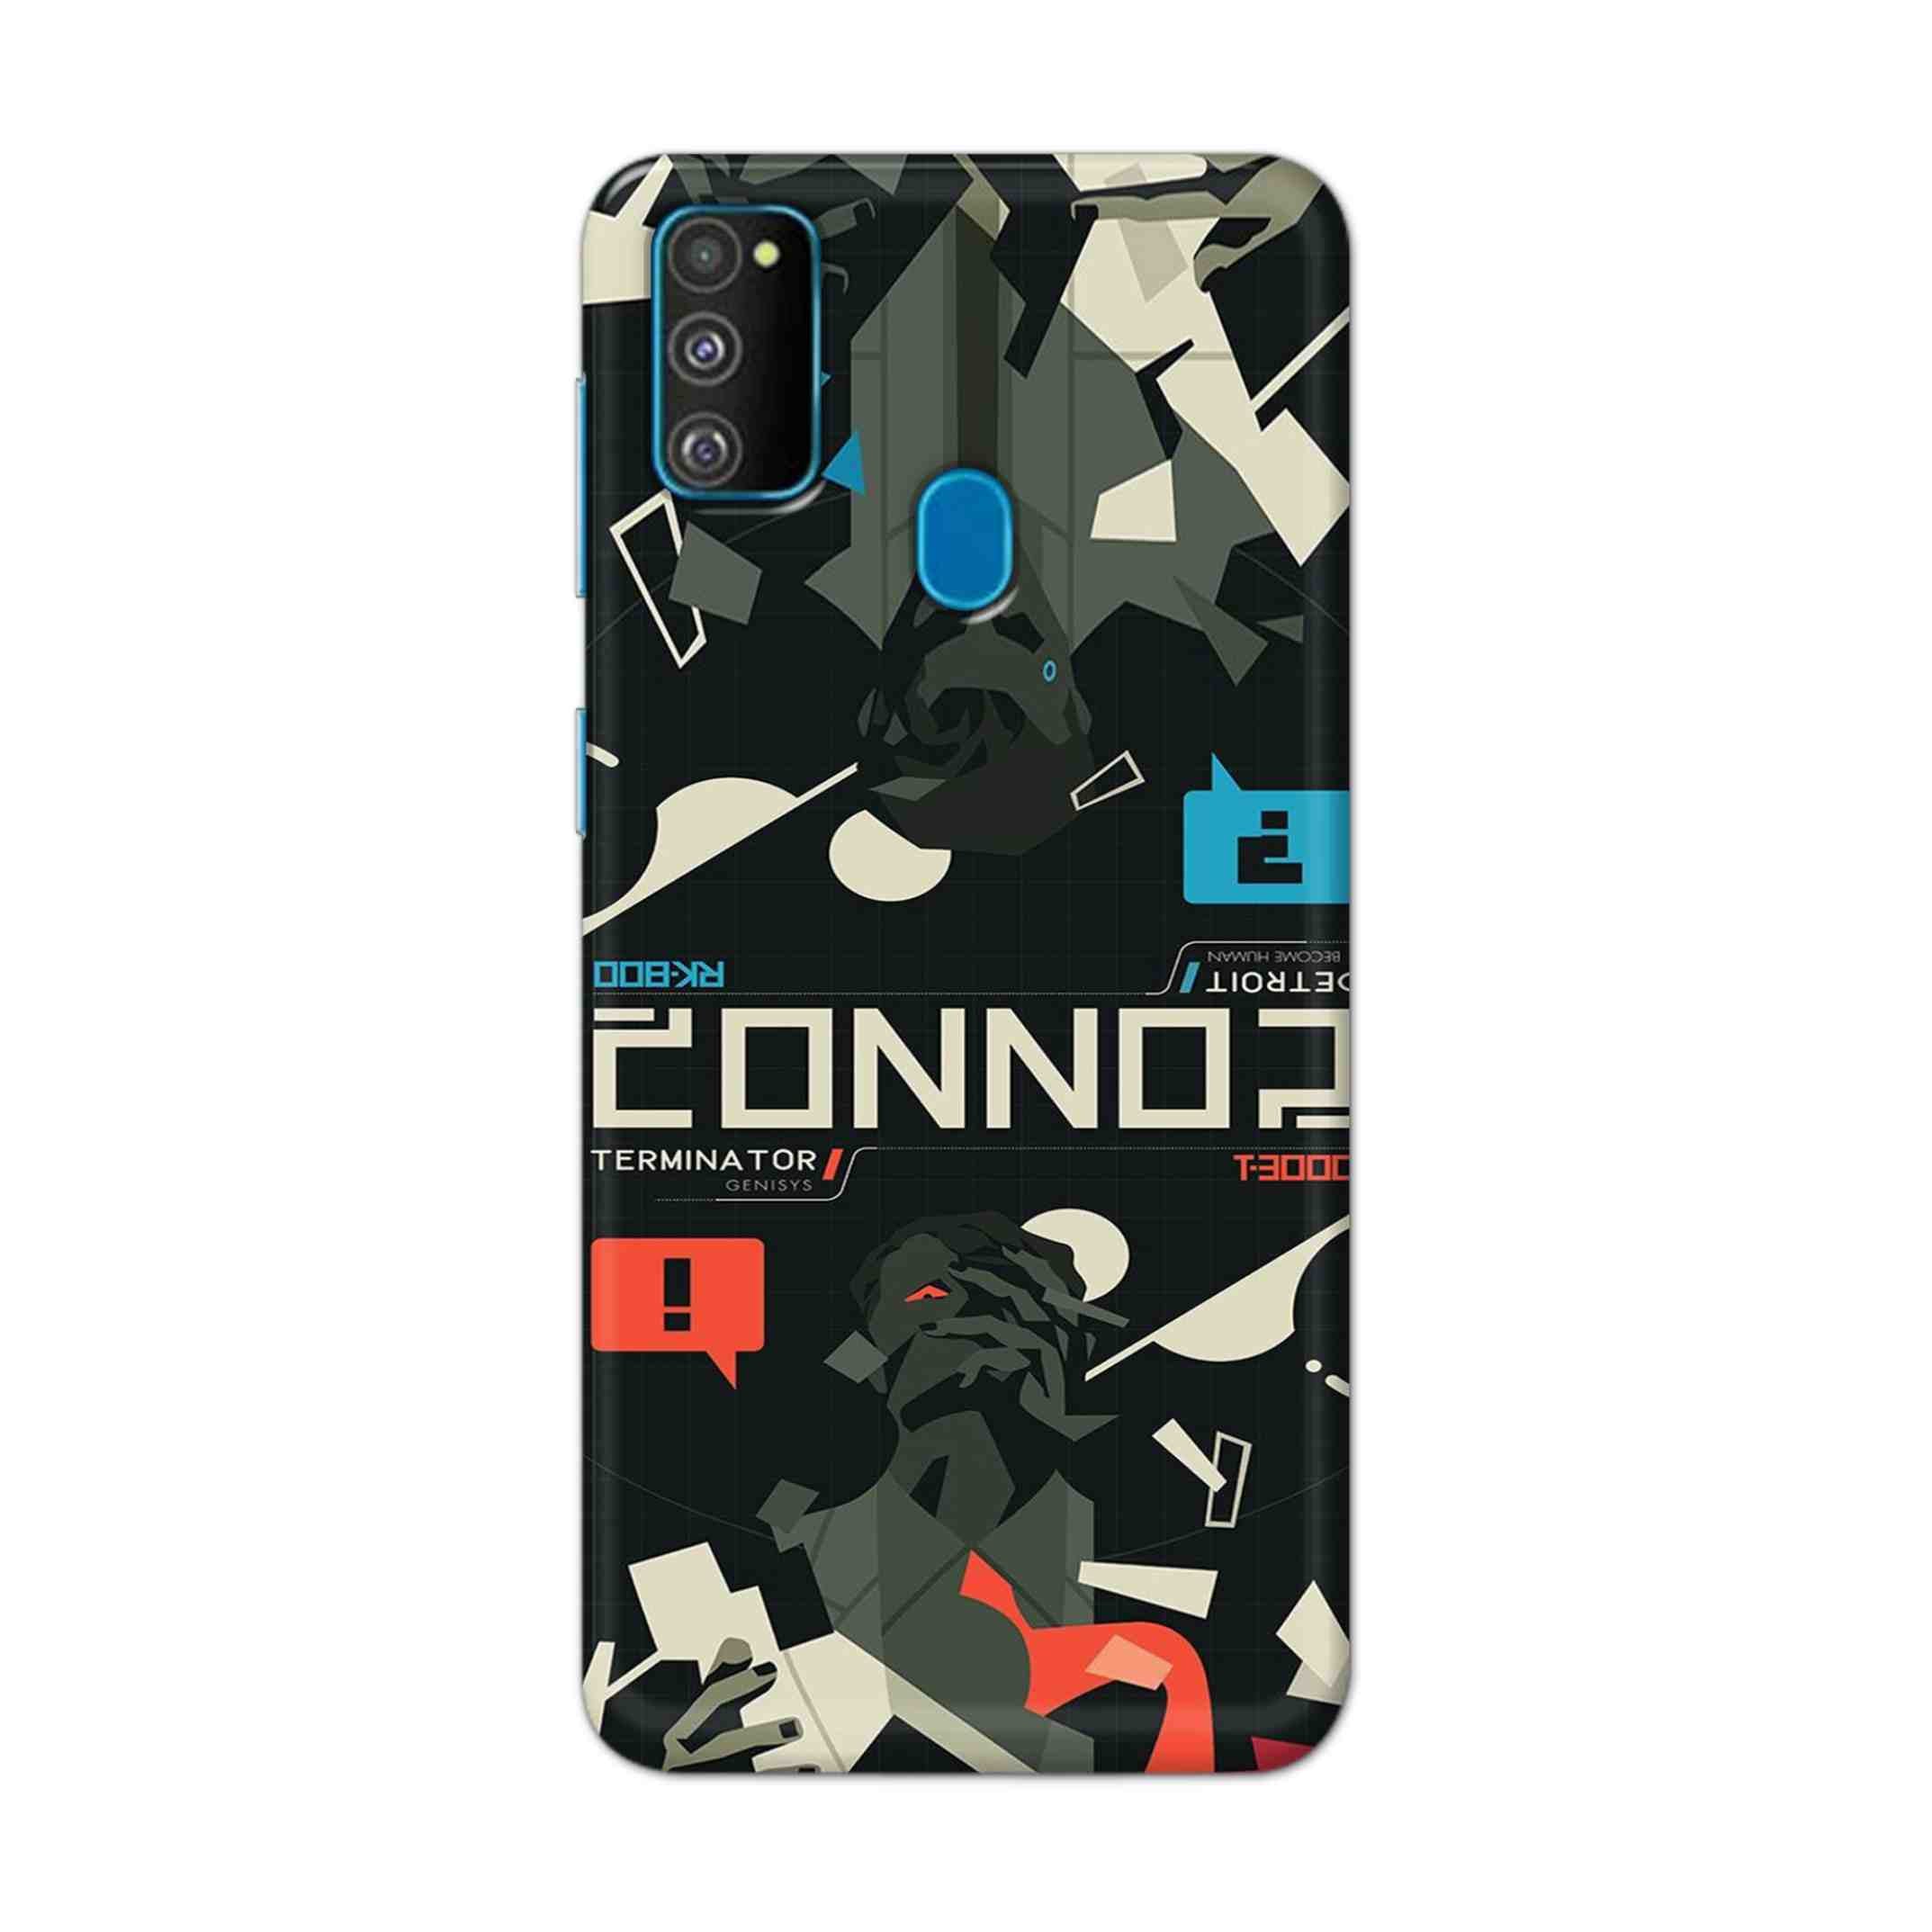 Buy Terminator Hard Back Mobile Phone Case Cover For Samsung Galaxy M30s Online